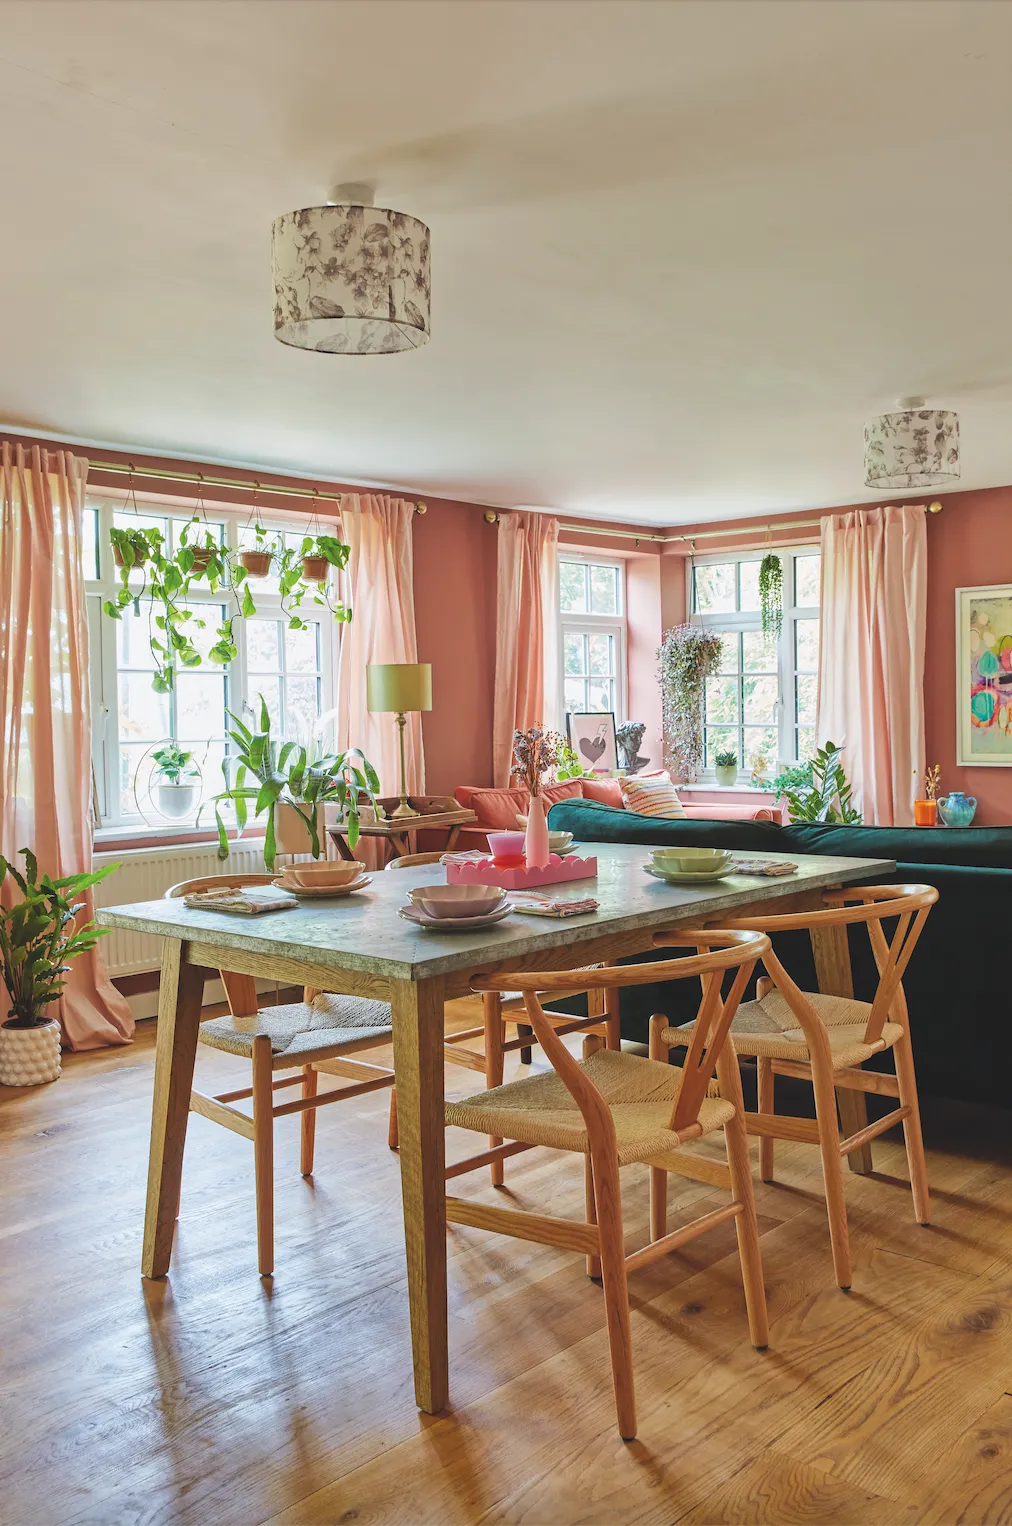 This room is where the family spend most of their time. Decorated in Charlotte’s signature style, with comfy furniture, bold artwork and plenty of houseplants, it’s a big, bright space with different zones for eating and relaxing, so everyone can be in here together while doing different things